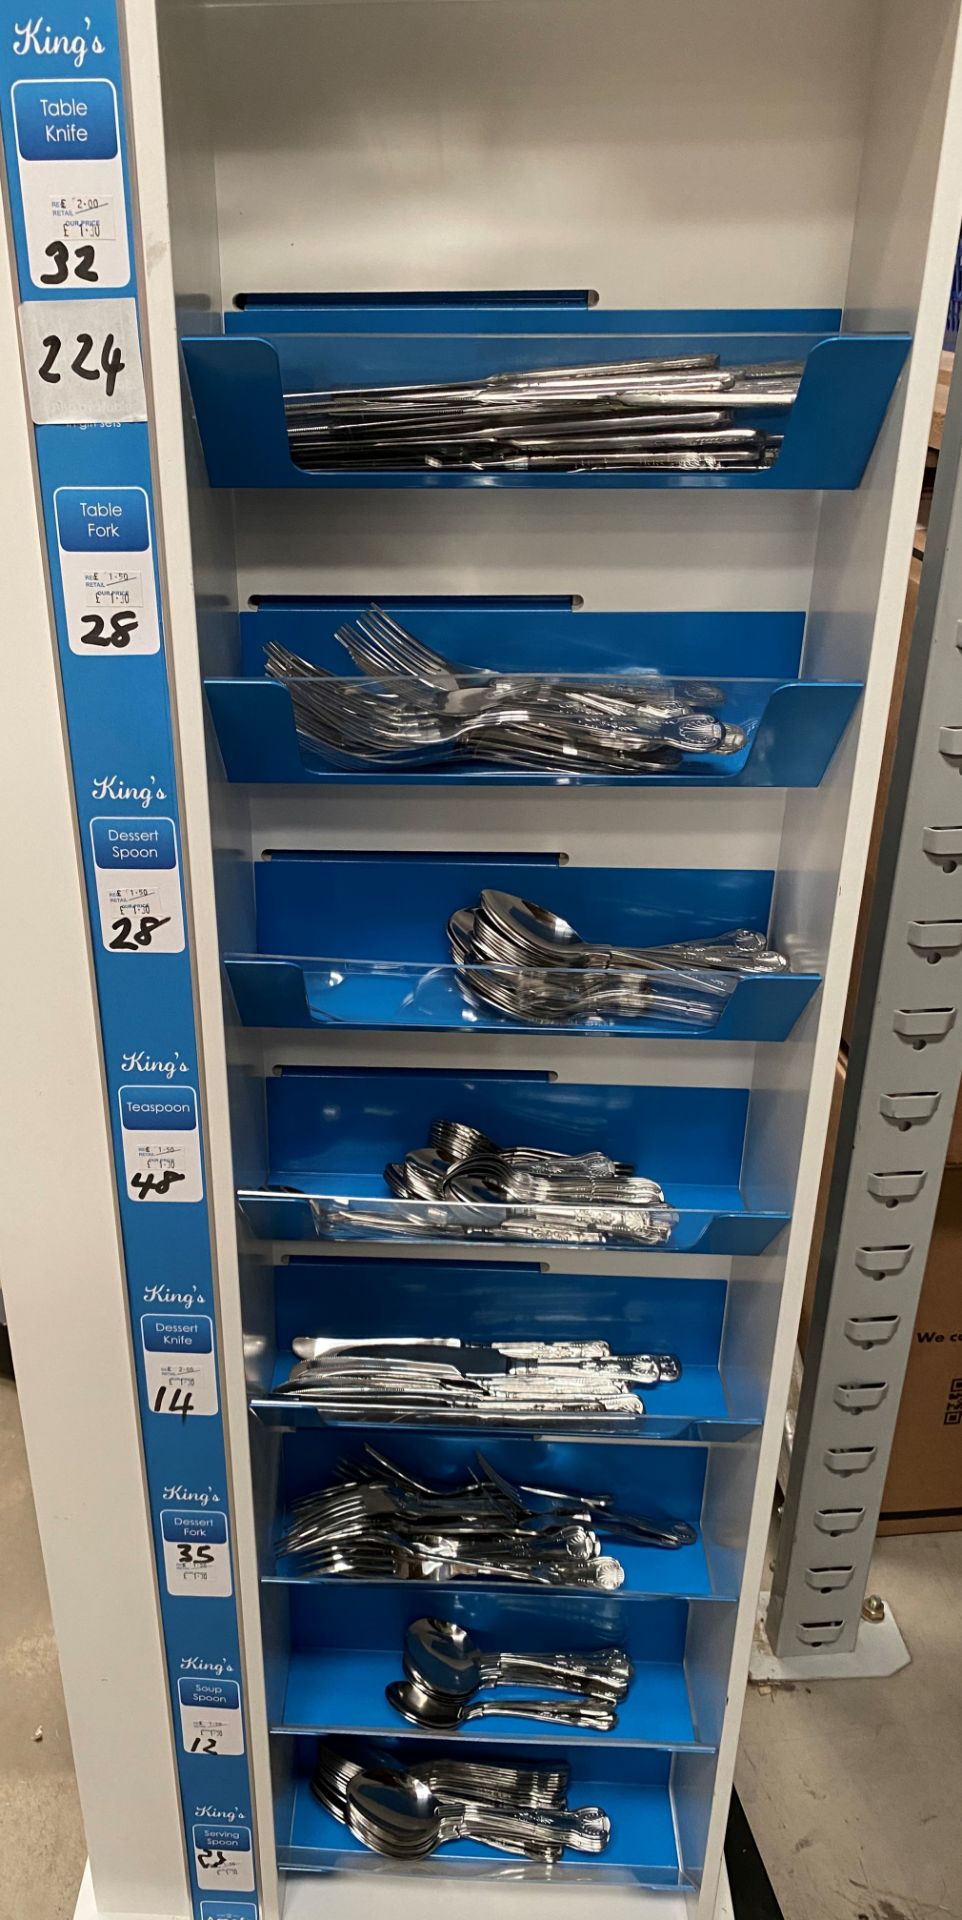 Contents to one side of an 8 shelf display - 224 pieces of Amefa Kings cutlery - including knives,